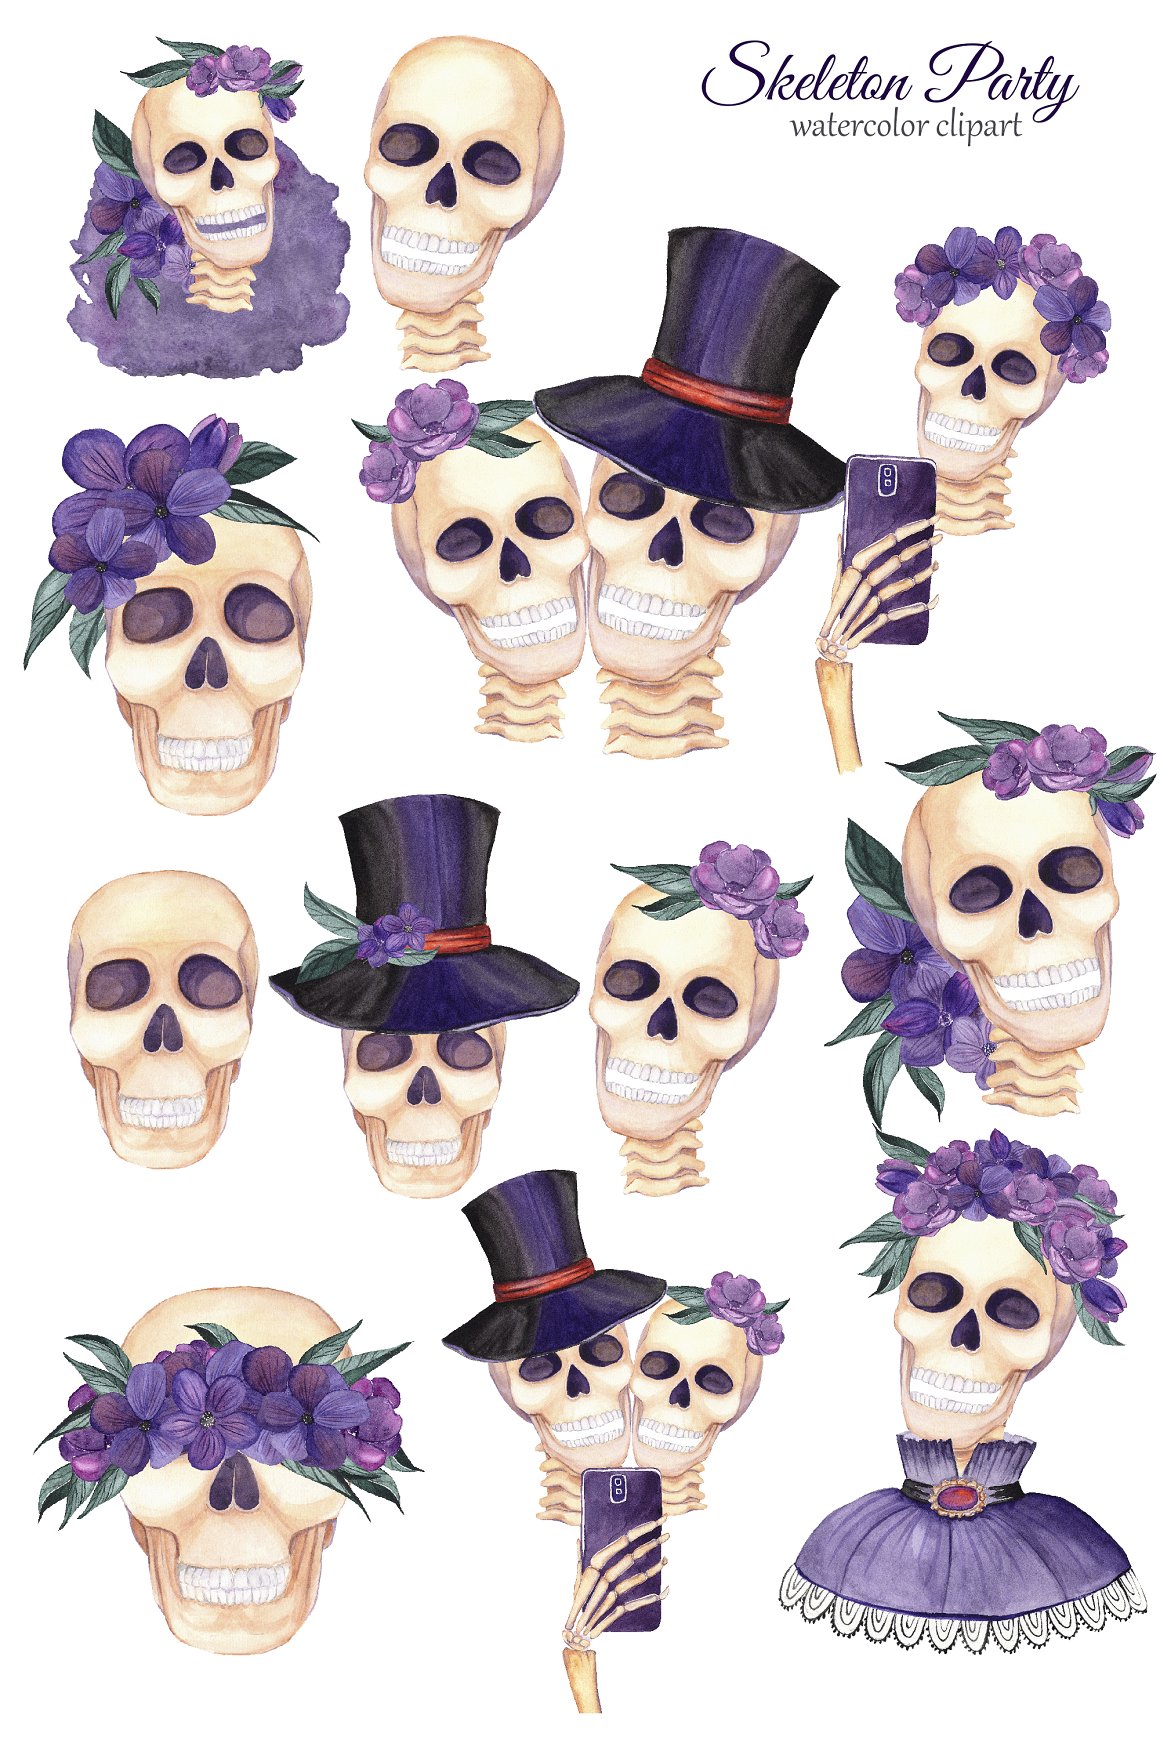 Various wonderful images of skeletons at the ball.